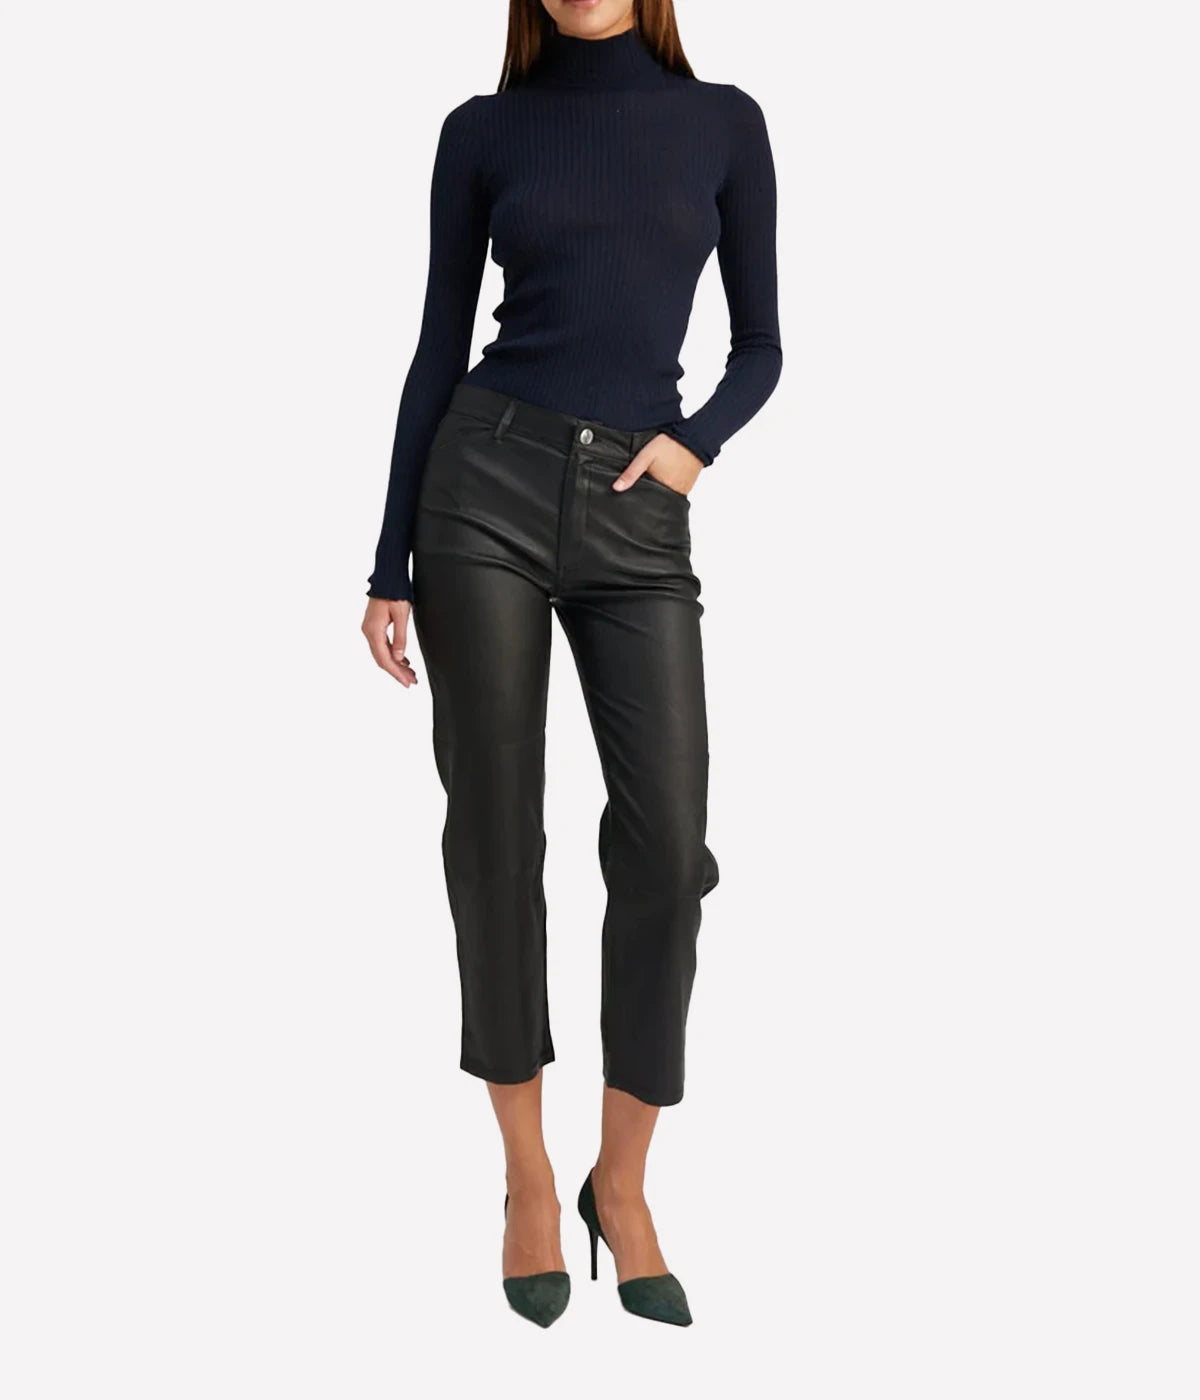 5 Pocket Straight Leg Leather Pant in Black